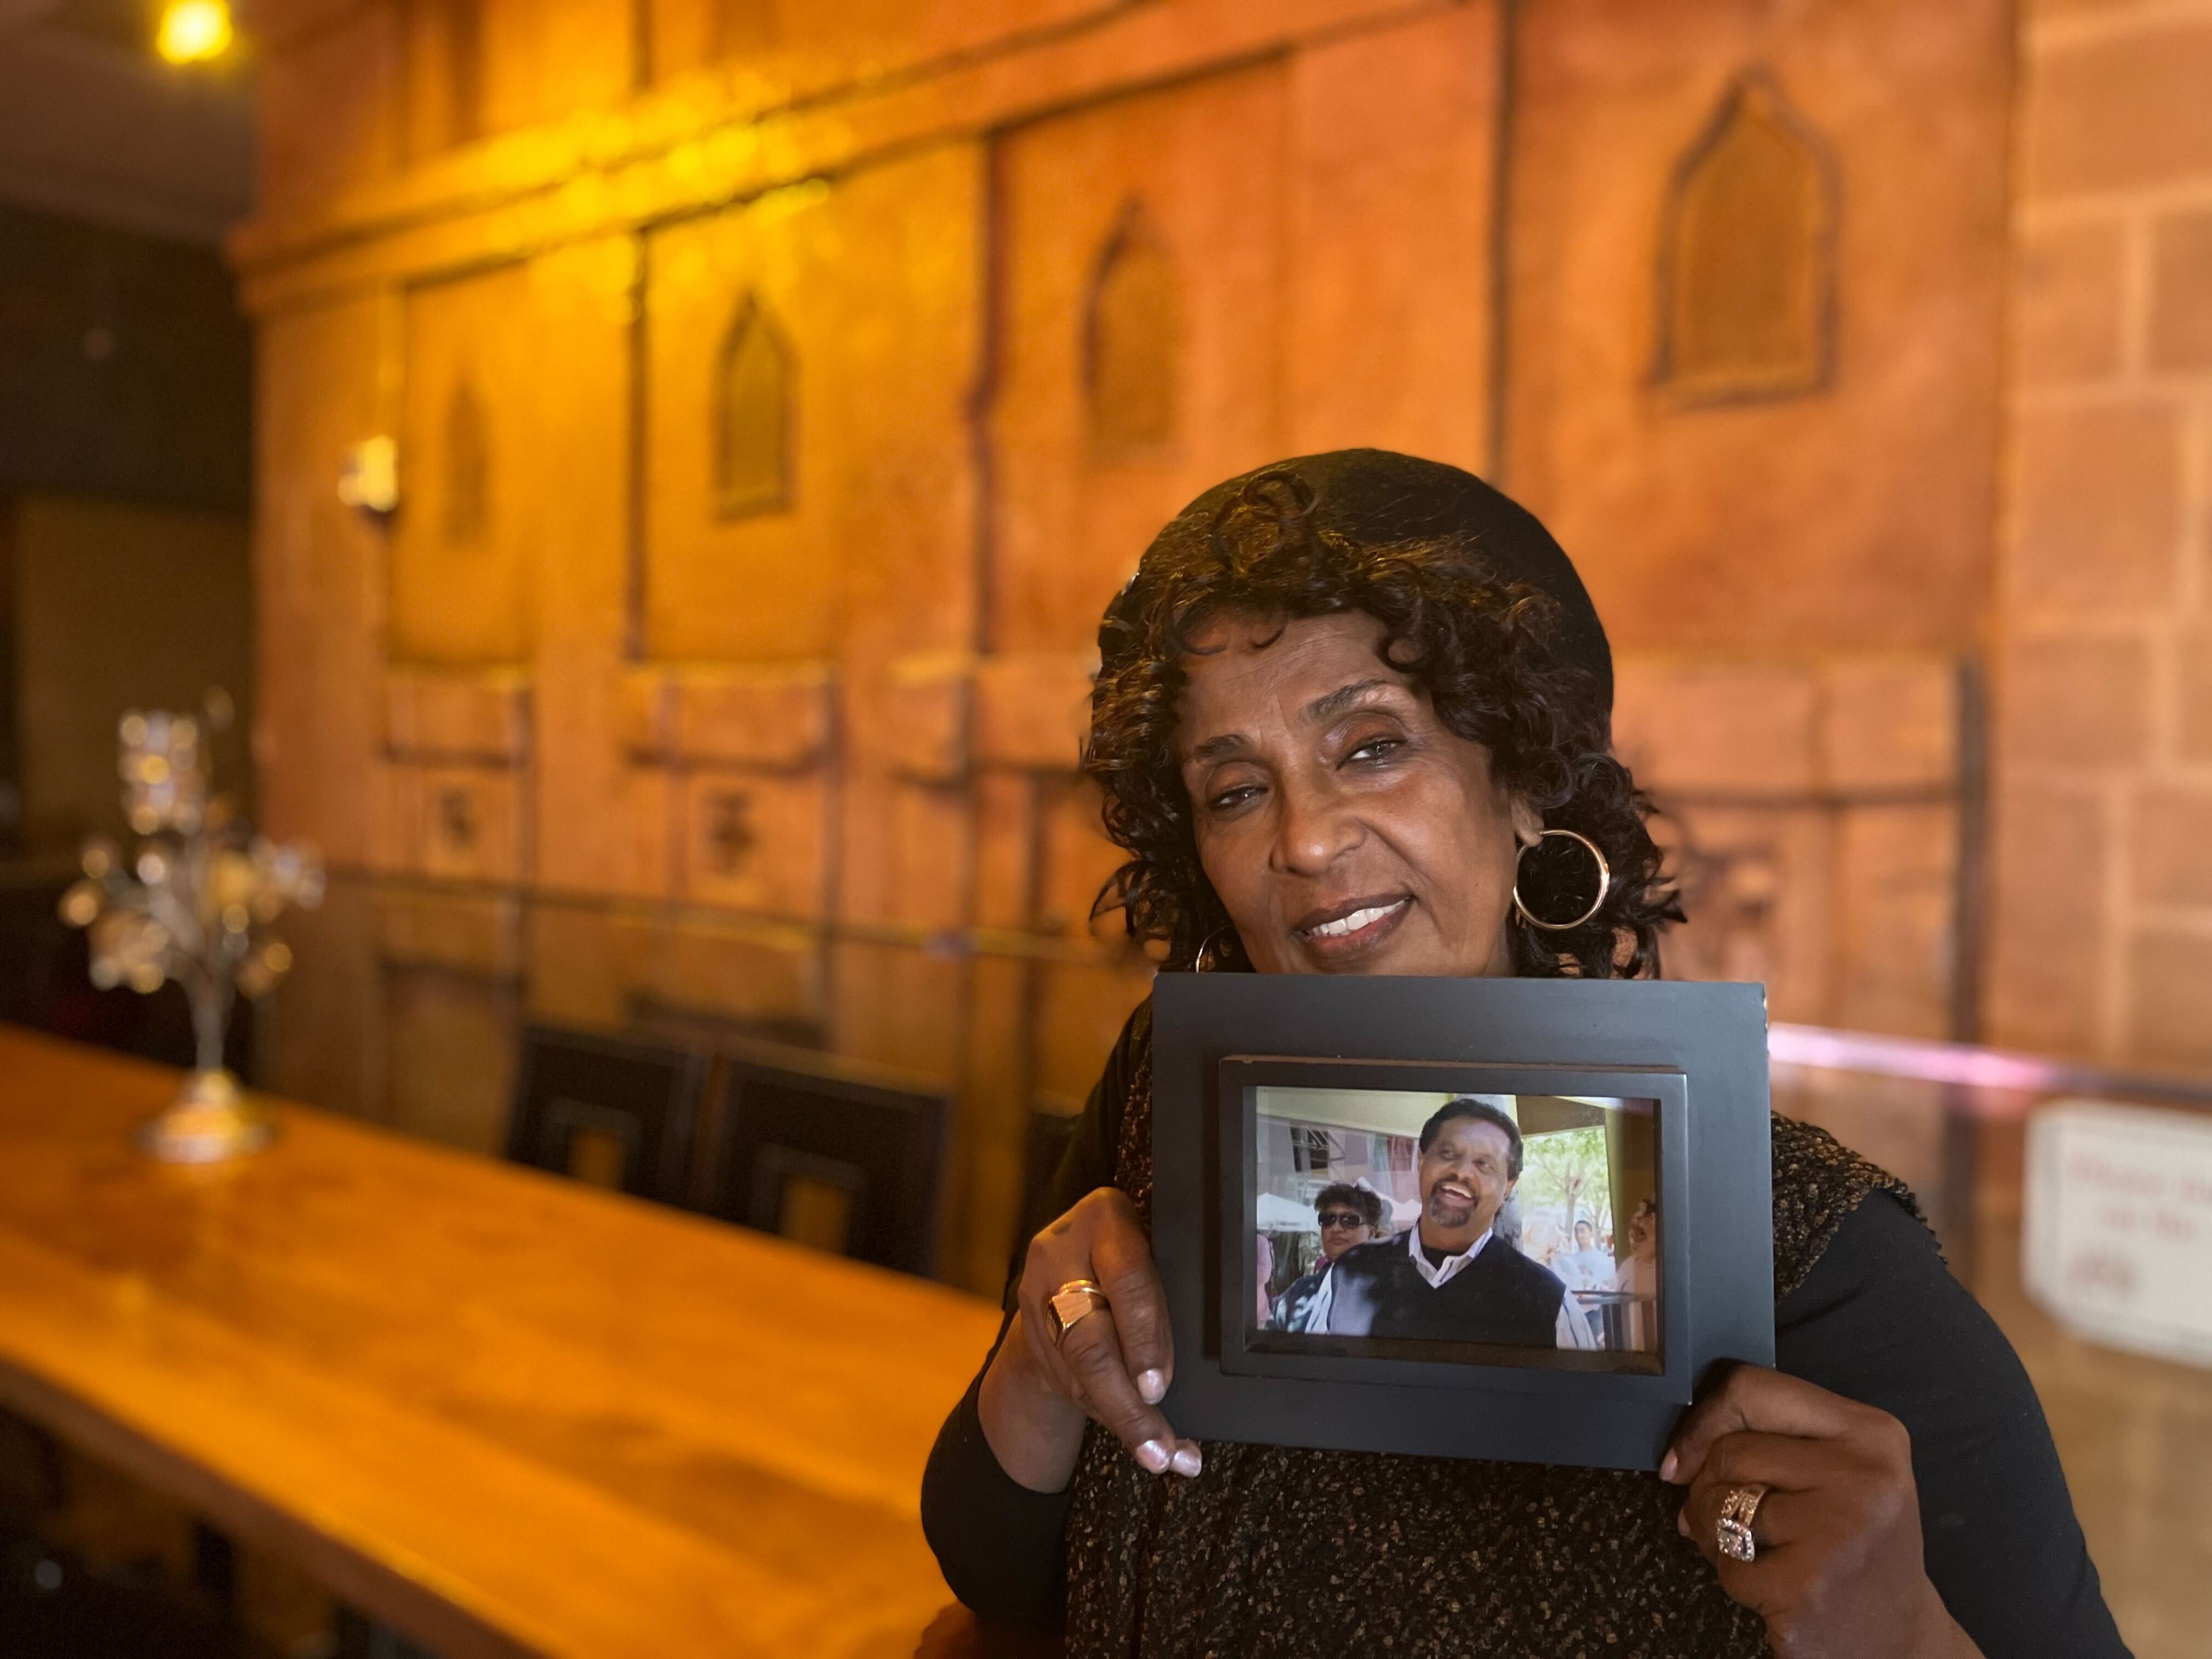 Net Alemayehu—owner of the Sheba Piano Lounge and wife of the late Agonafer Shiferaw—stands with a portrait of her husband in her lounge. Shiferaw, who owned the historic Rasselas Jazz Club in the Fillmore District for 26 years, died on Nov. 11, 2023 after an over year-long battle with cancer.